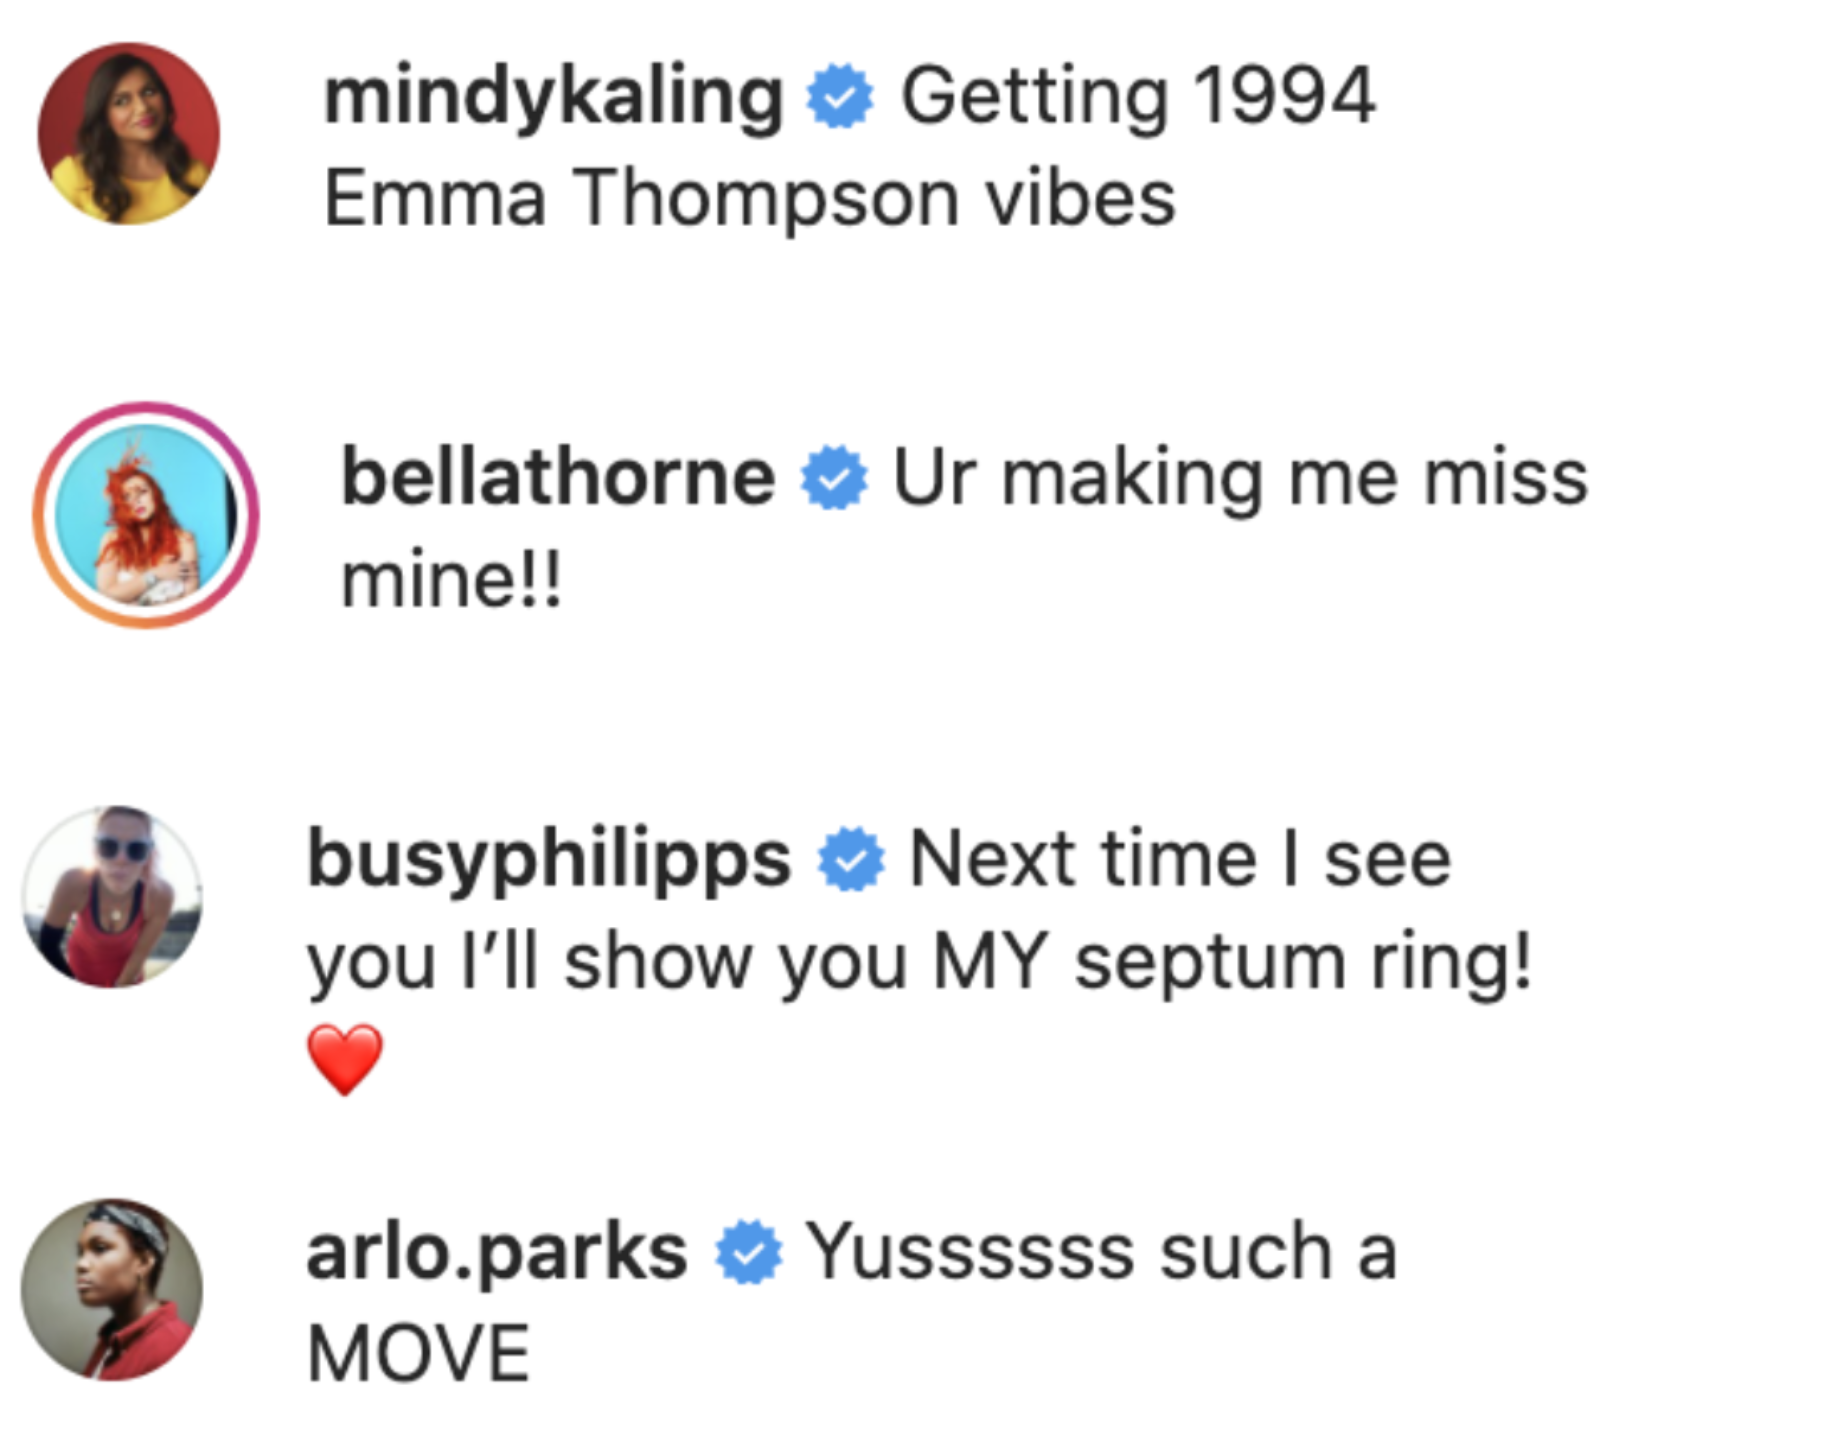 Mindy Kaling said &quot;Getting 1994 Emma Thompson vibes&quot; and Belly Thorne says Flo makes her miss her septum ring